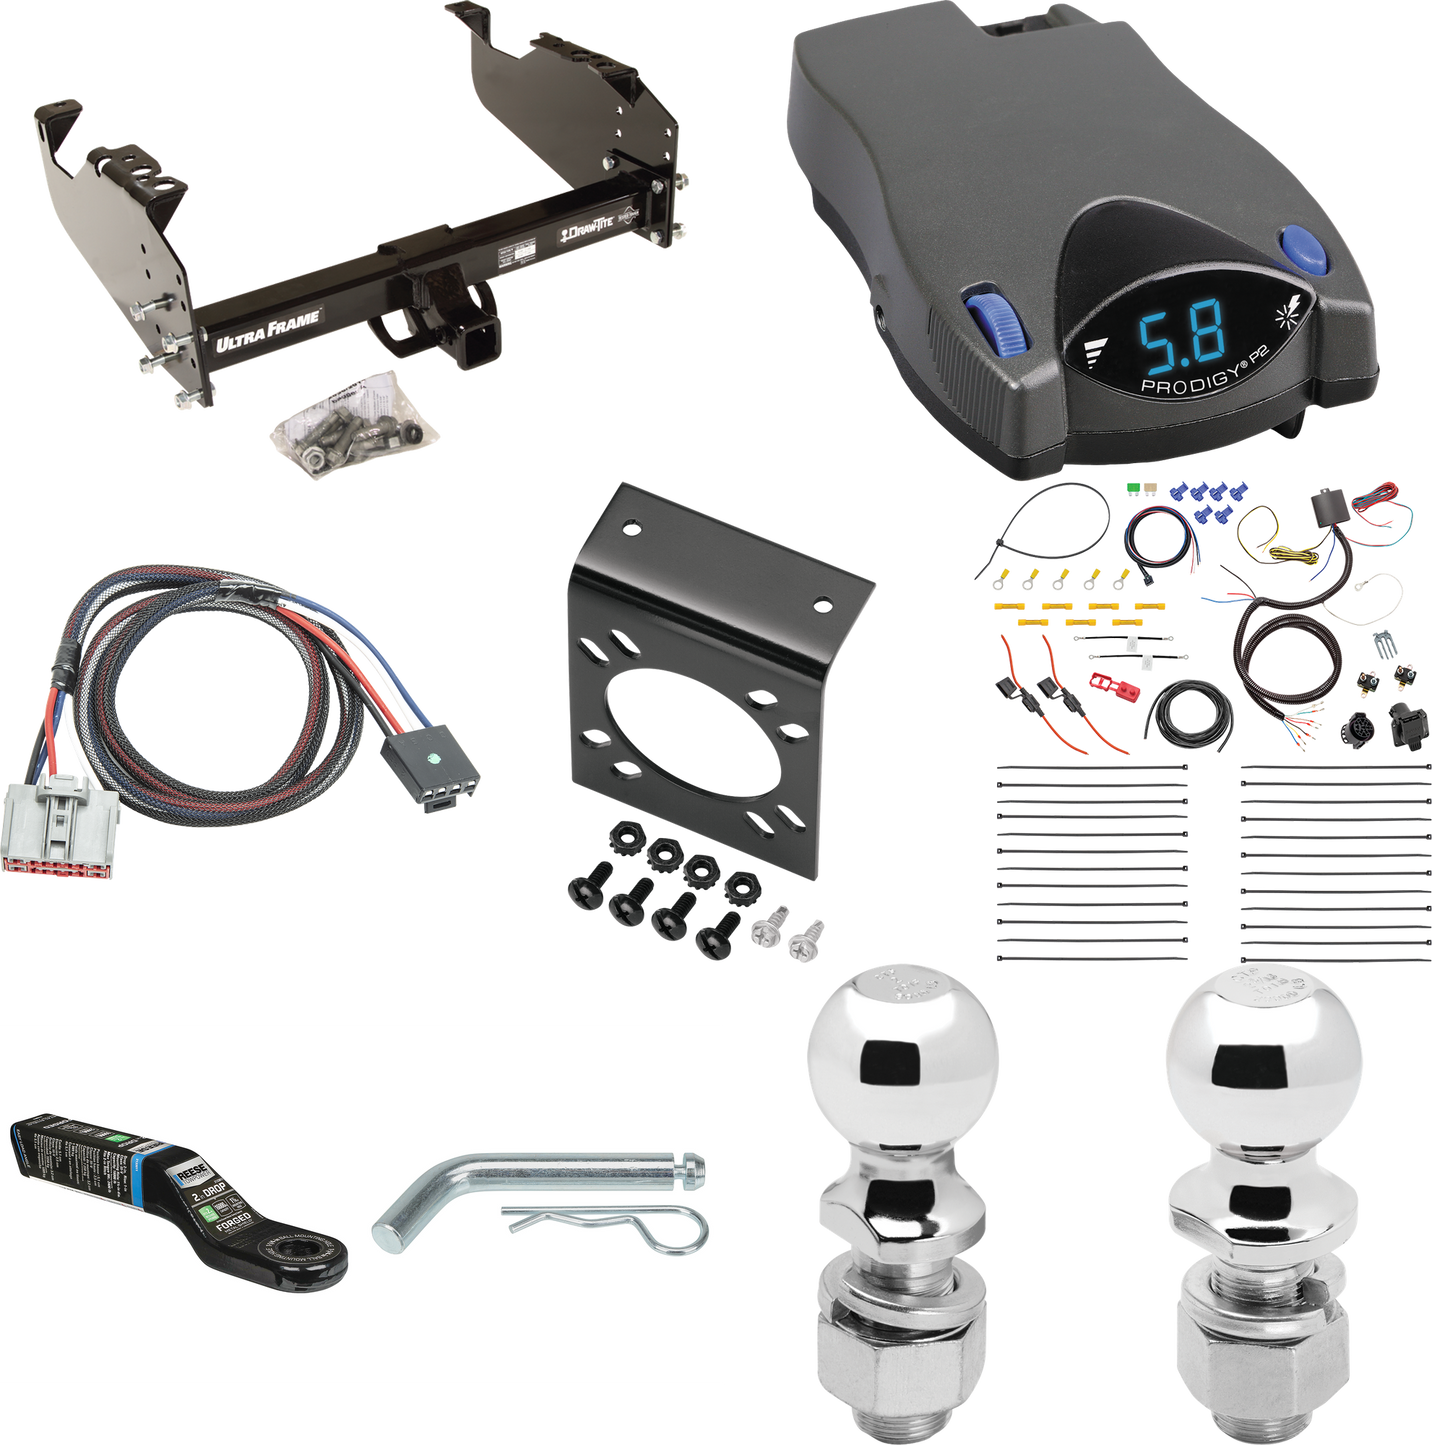 Fits 2020-2023 Chevrolet Silverado 3500 HD Trailer Hitch Tow PKG w/ Tekonsha Prodigy P2 Brake Control + Plug & Play BC Adapter + 7-Way RV Wiring + 2" & 2-5/16" Ball & Drop Mount (For Cab & Chassis, w/34" Wide Frames Models) By Draw-Tite